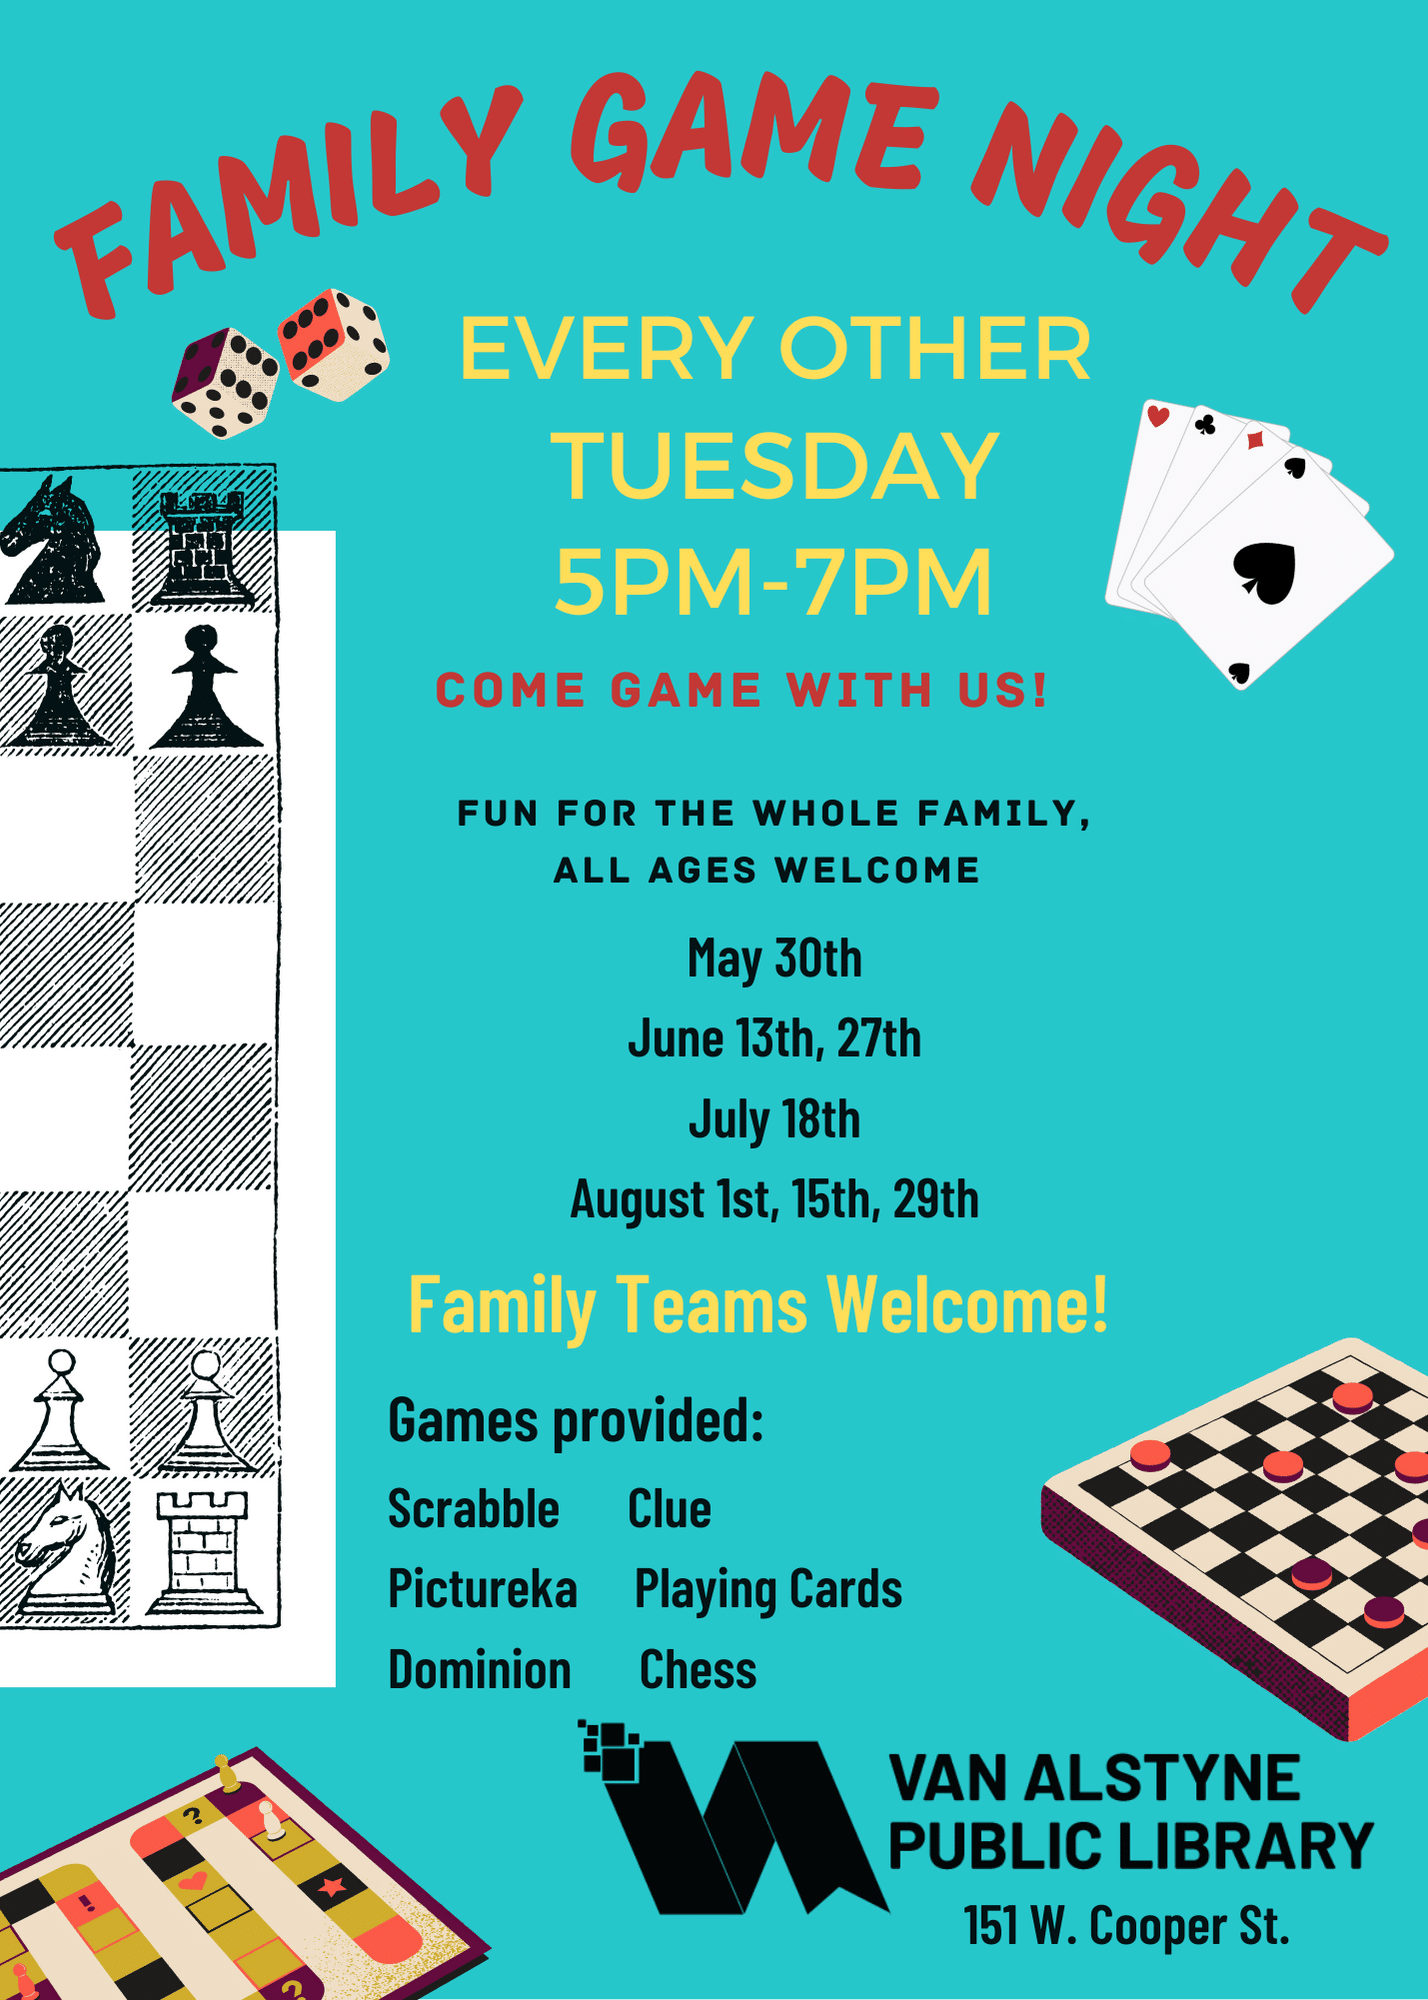 Join us every other Tuesday for a Family Game Night